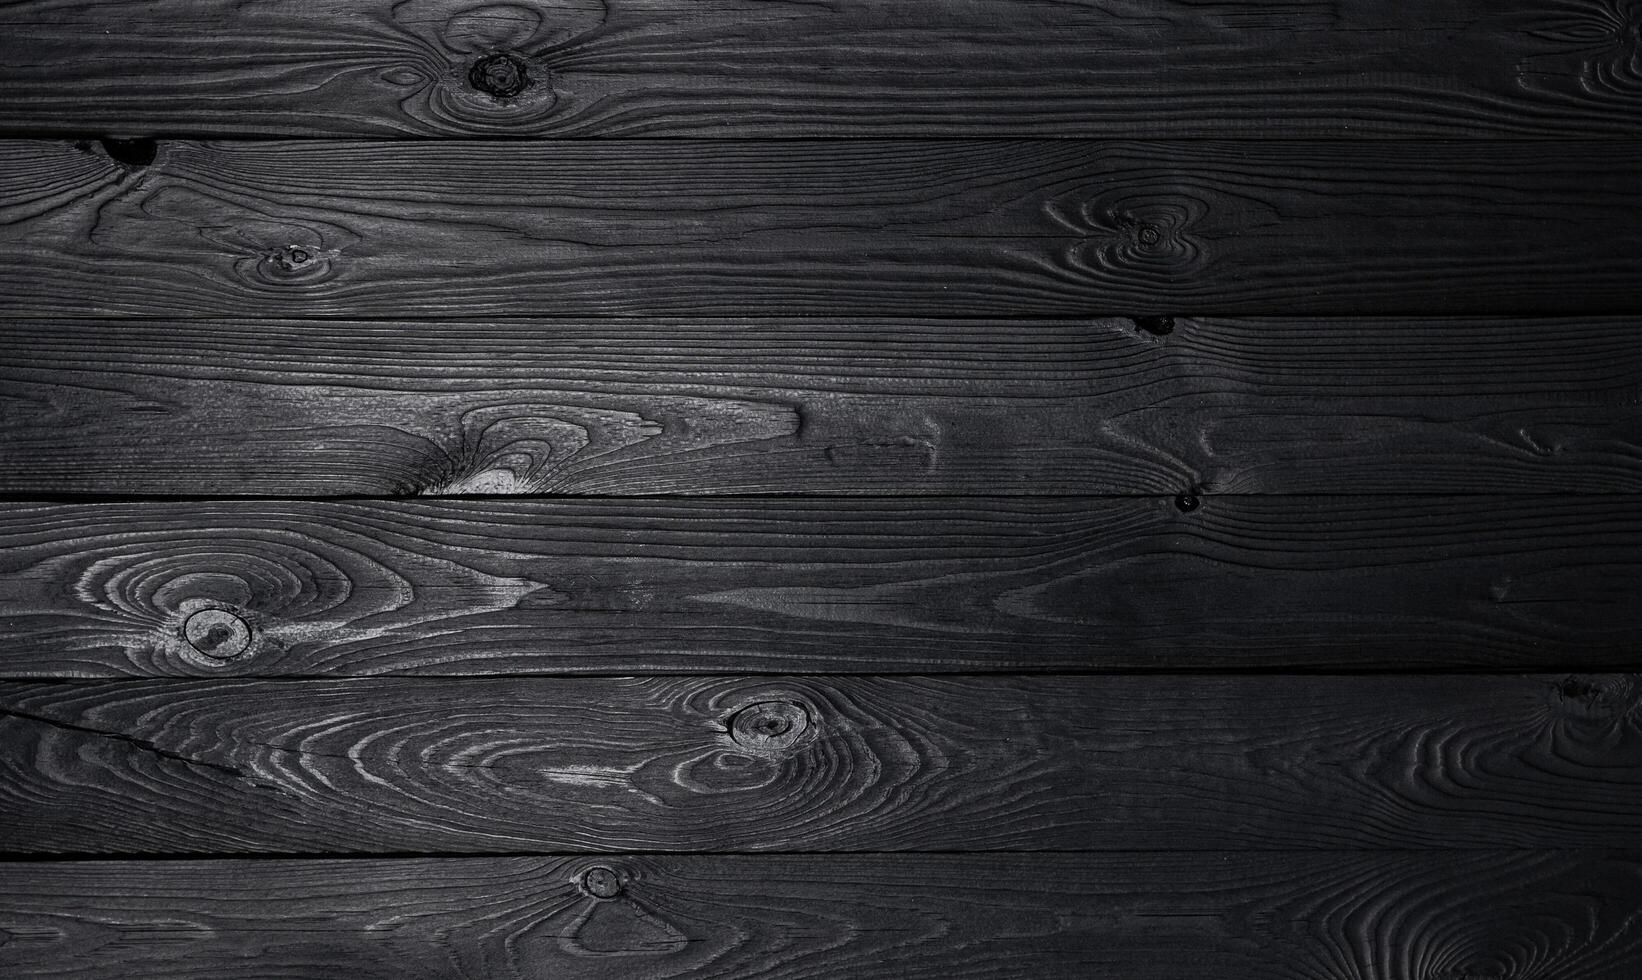 Black wooden background, old wooden planks texture photo